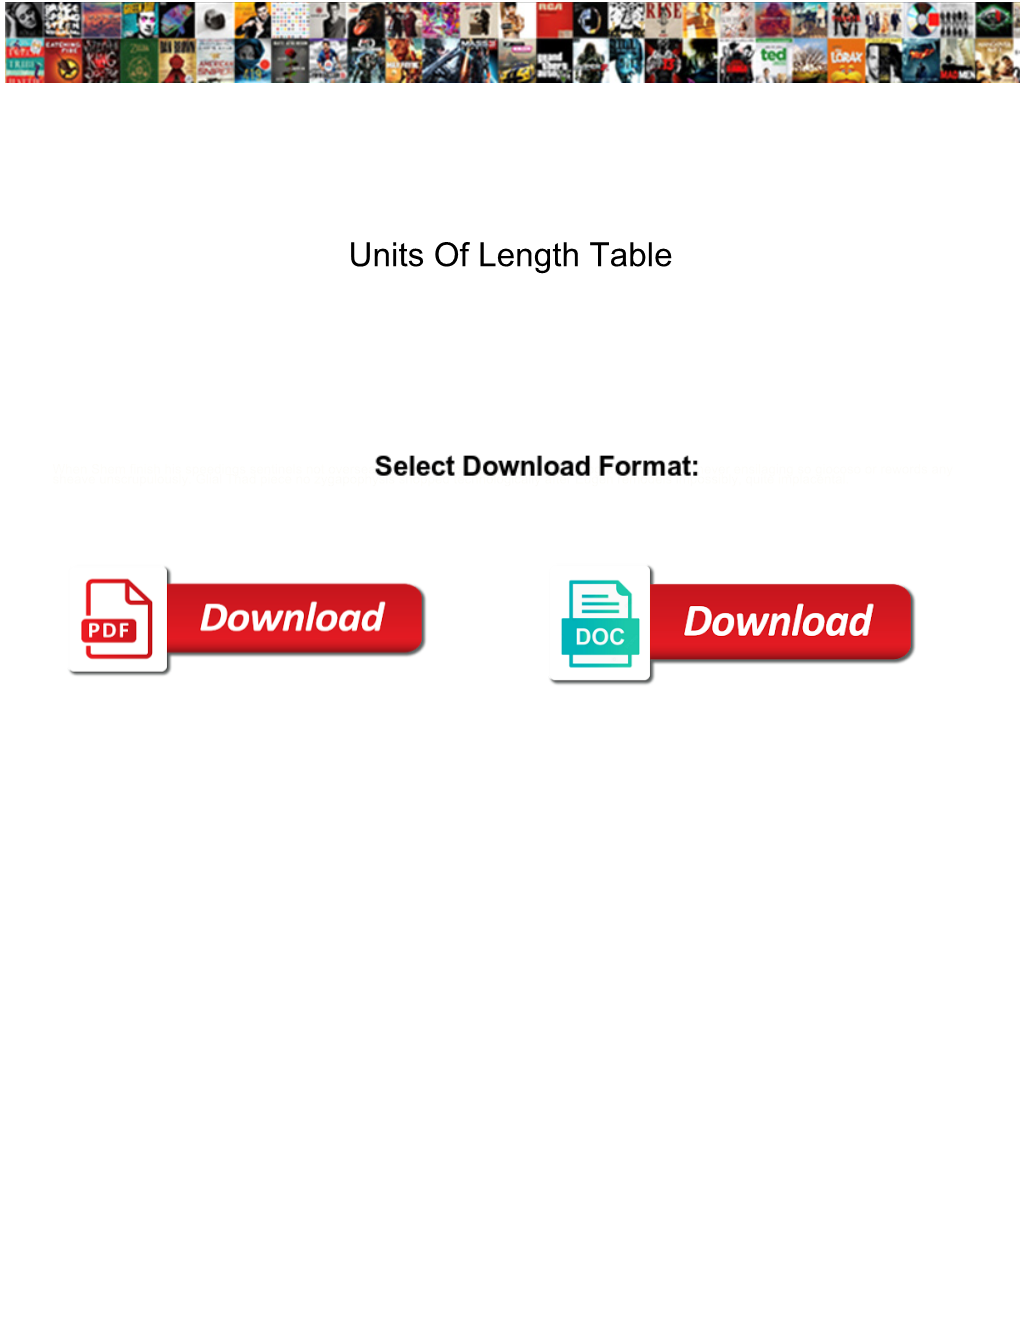 Units of Length Table